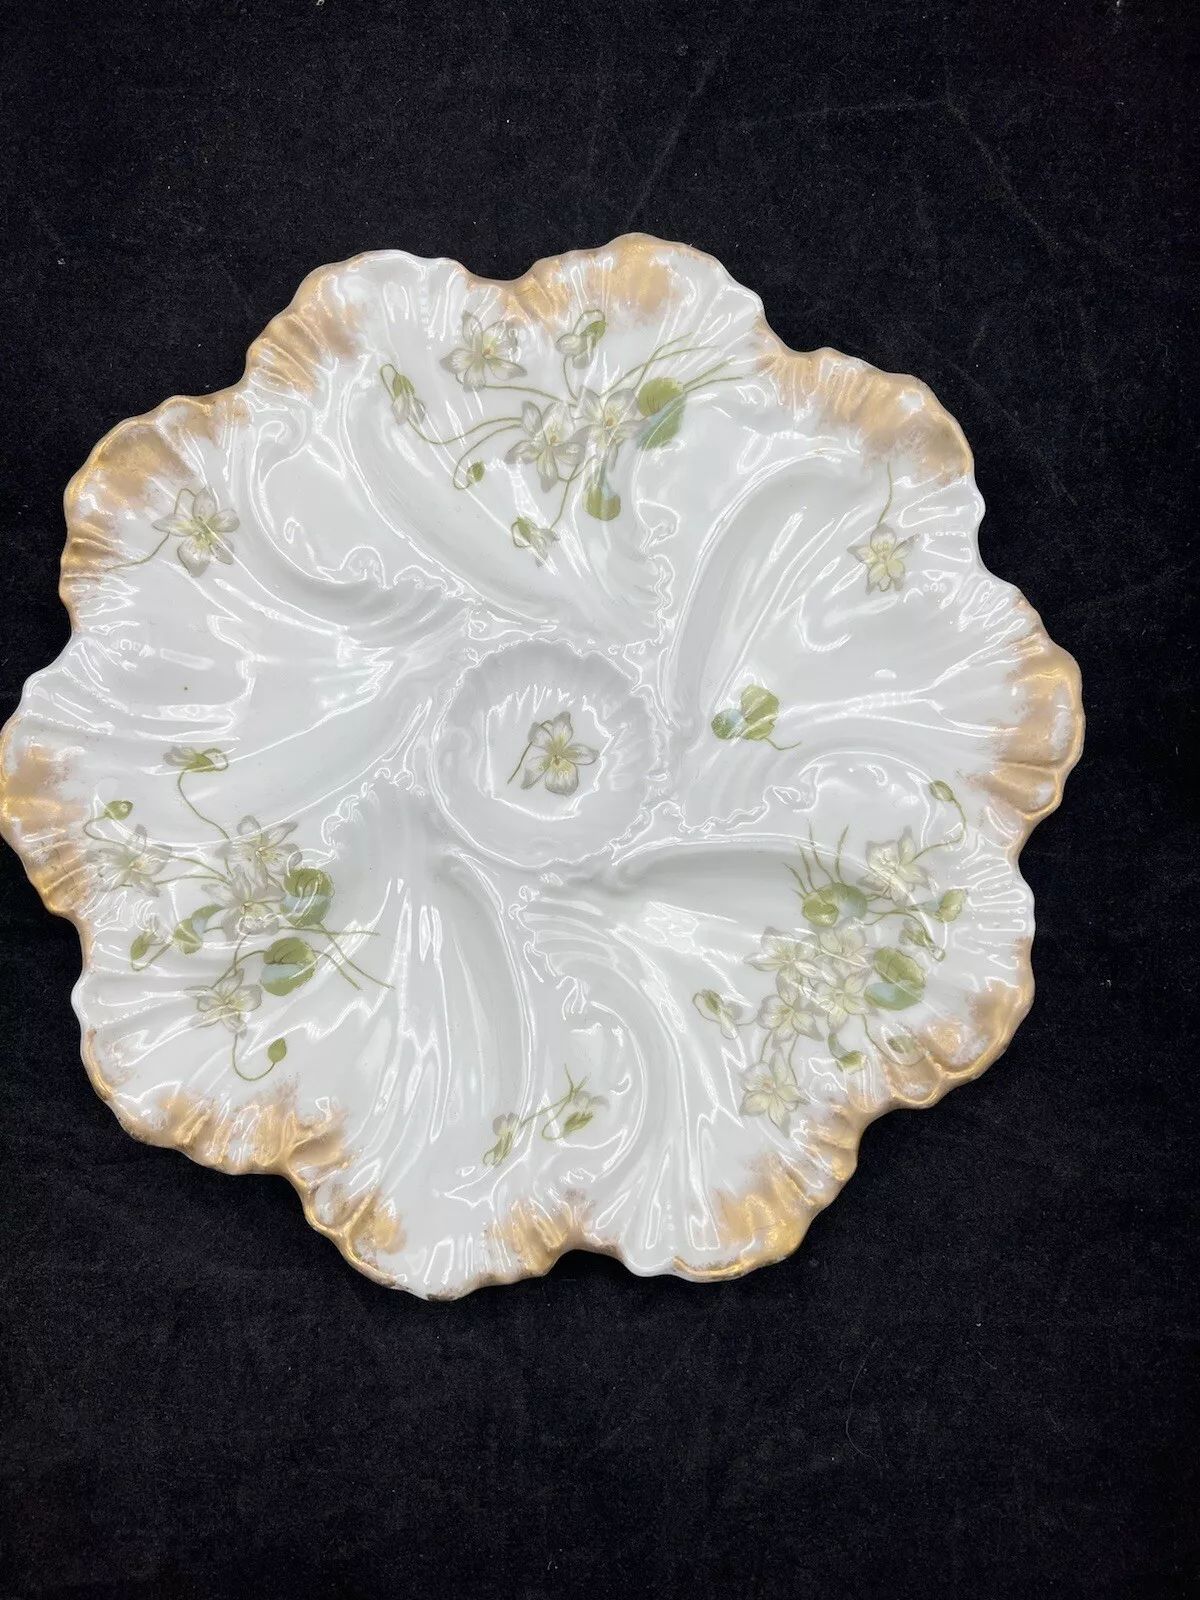 Antique  Alfred Lanternier Limoges Oyster Plate 9.5” Hand Painted Flowers | eBay US